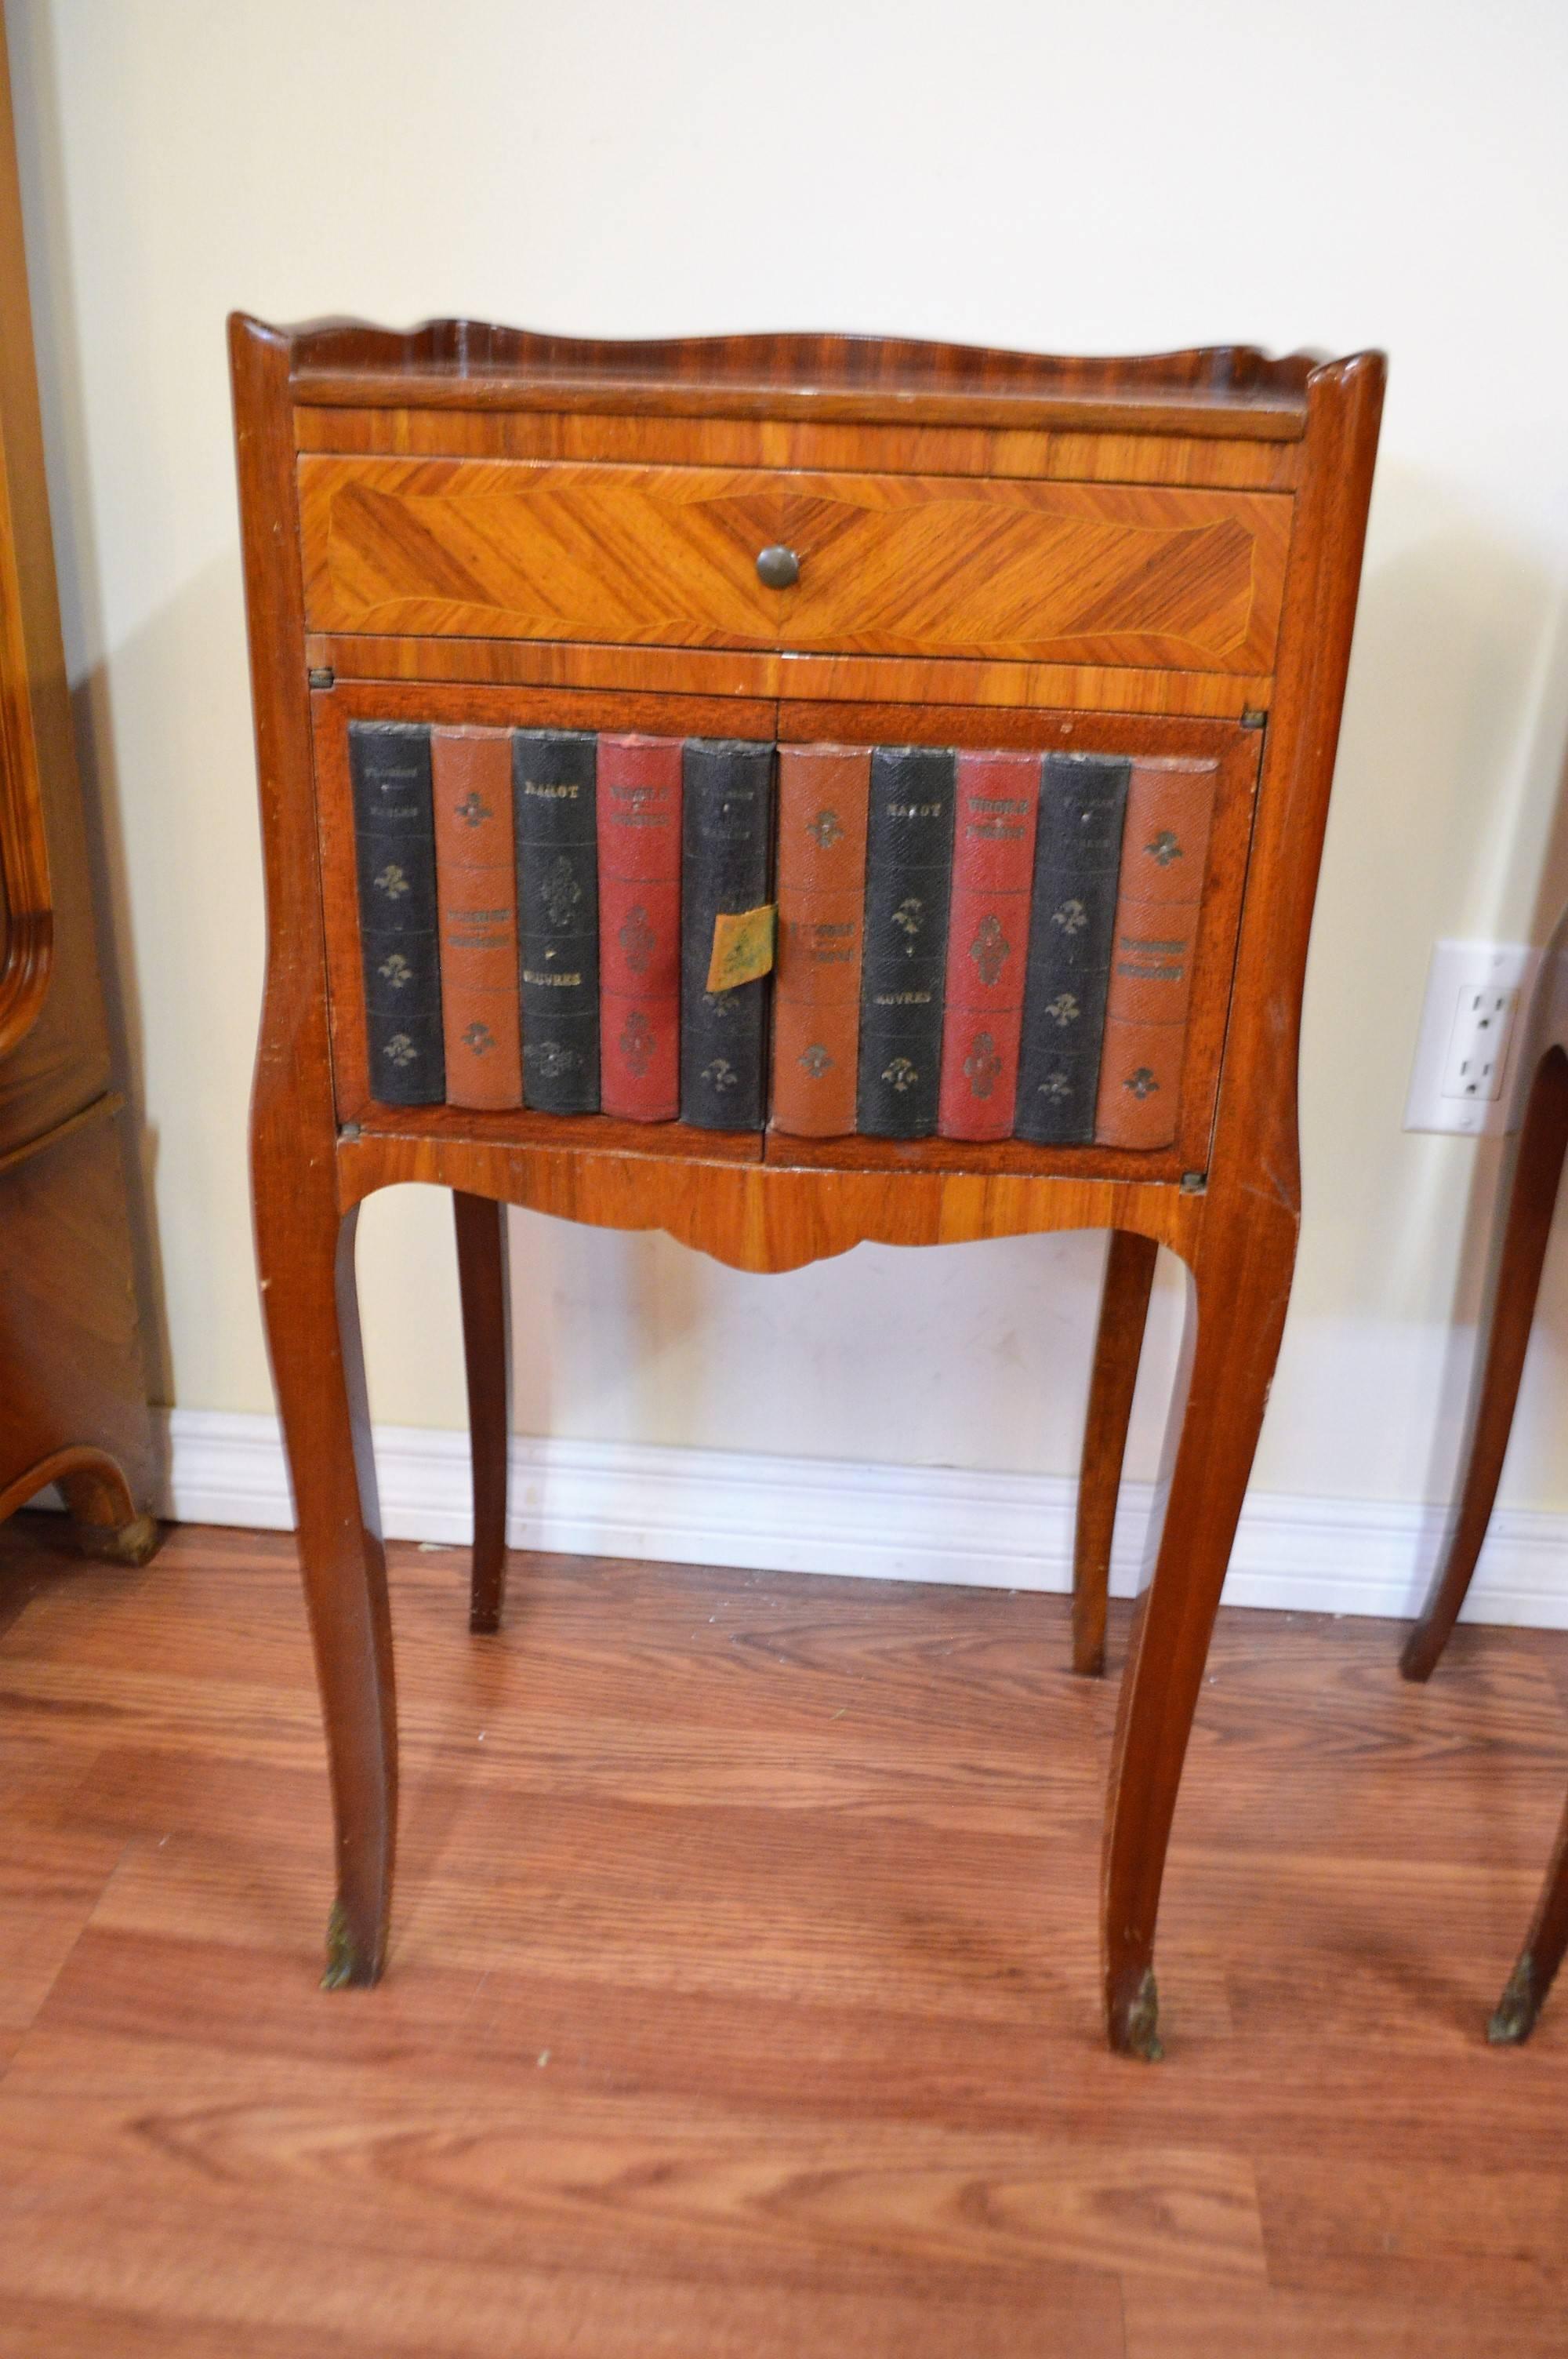 Unusual pair of Transitional wood inlay side table, night tables, both with compartment and a top drawer. One has a faux leather book exterior.